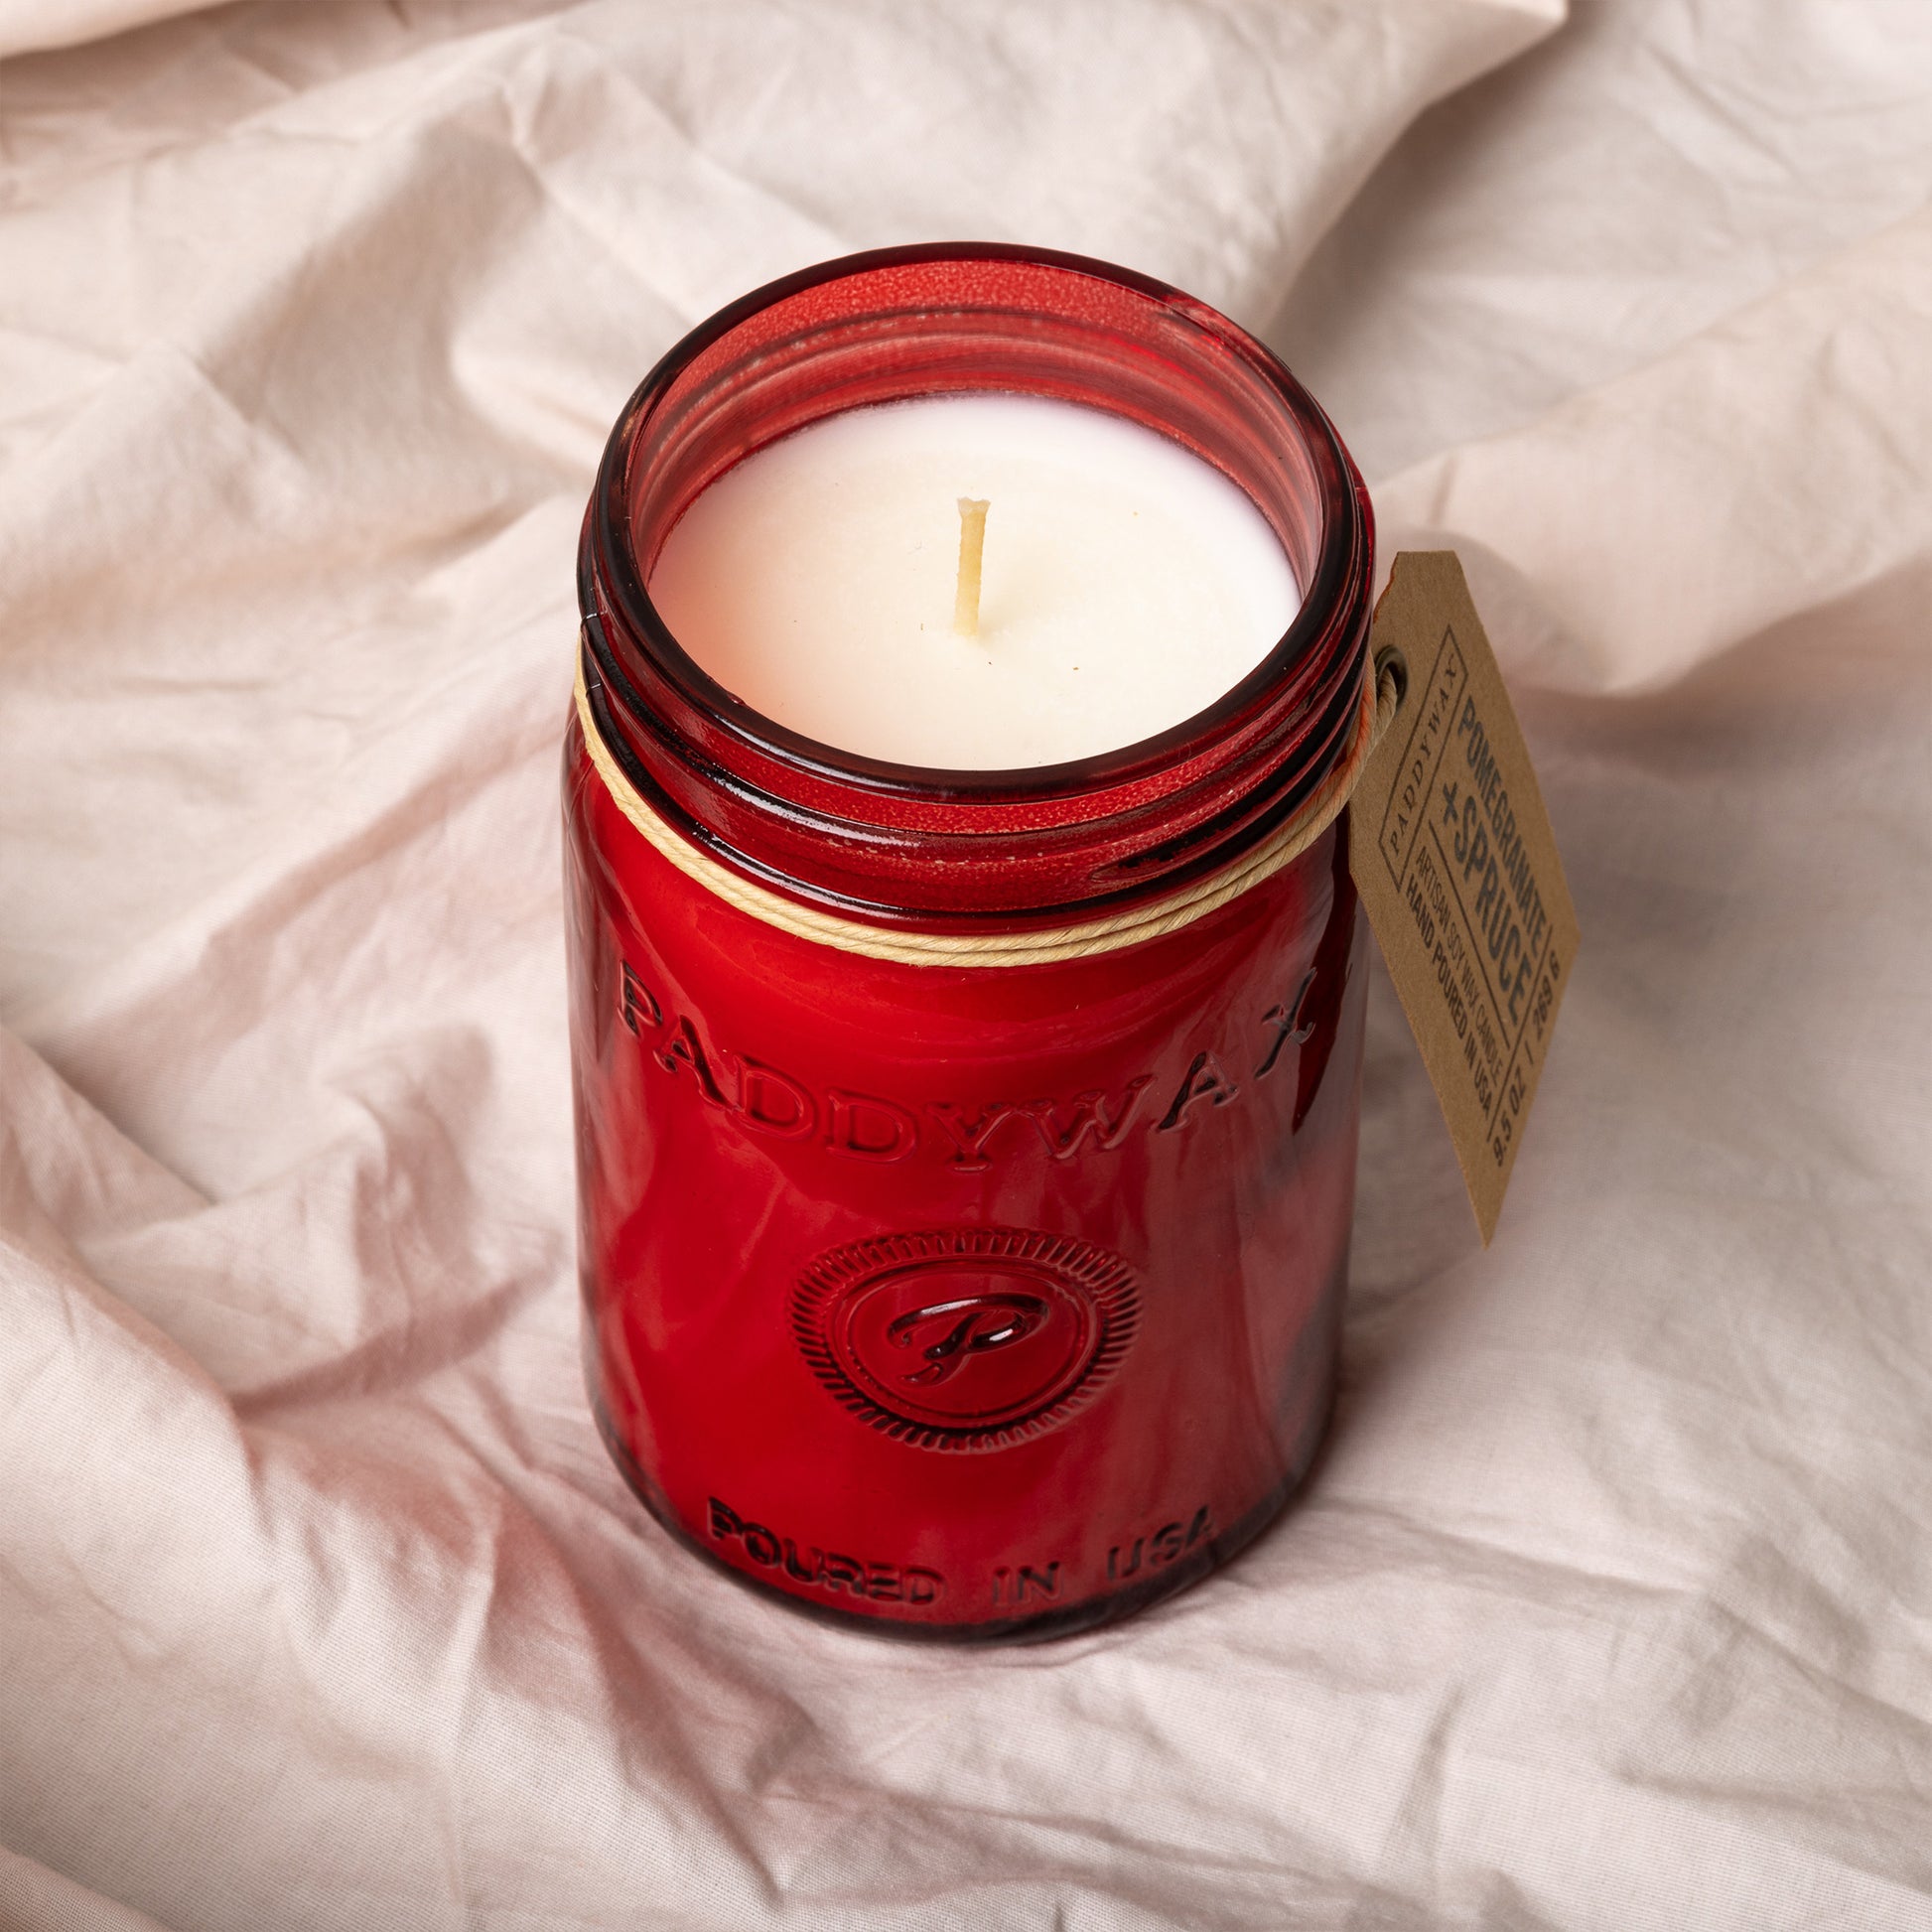 Pomegranate Relish Candle shown from the top with the single wick